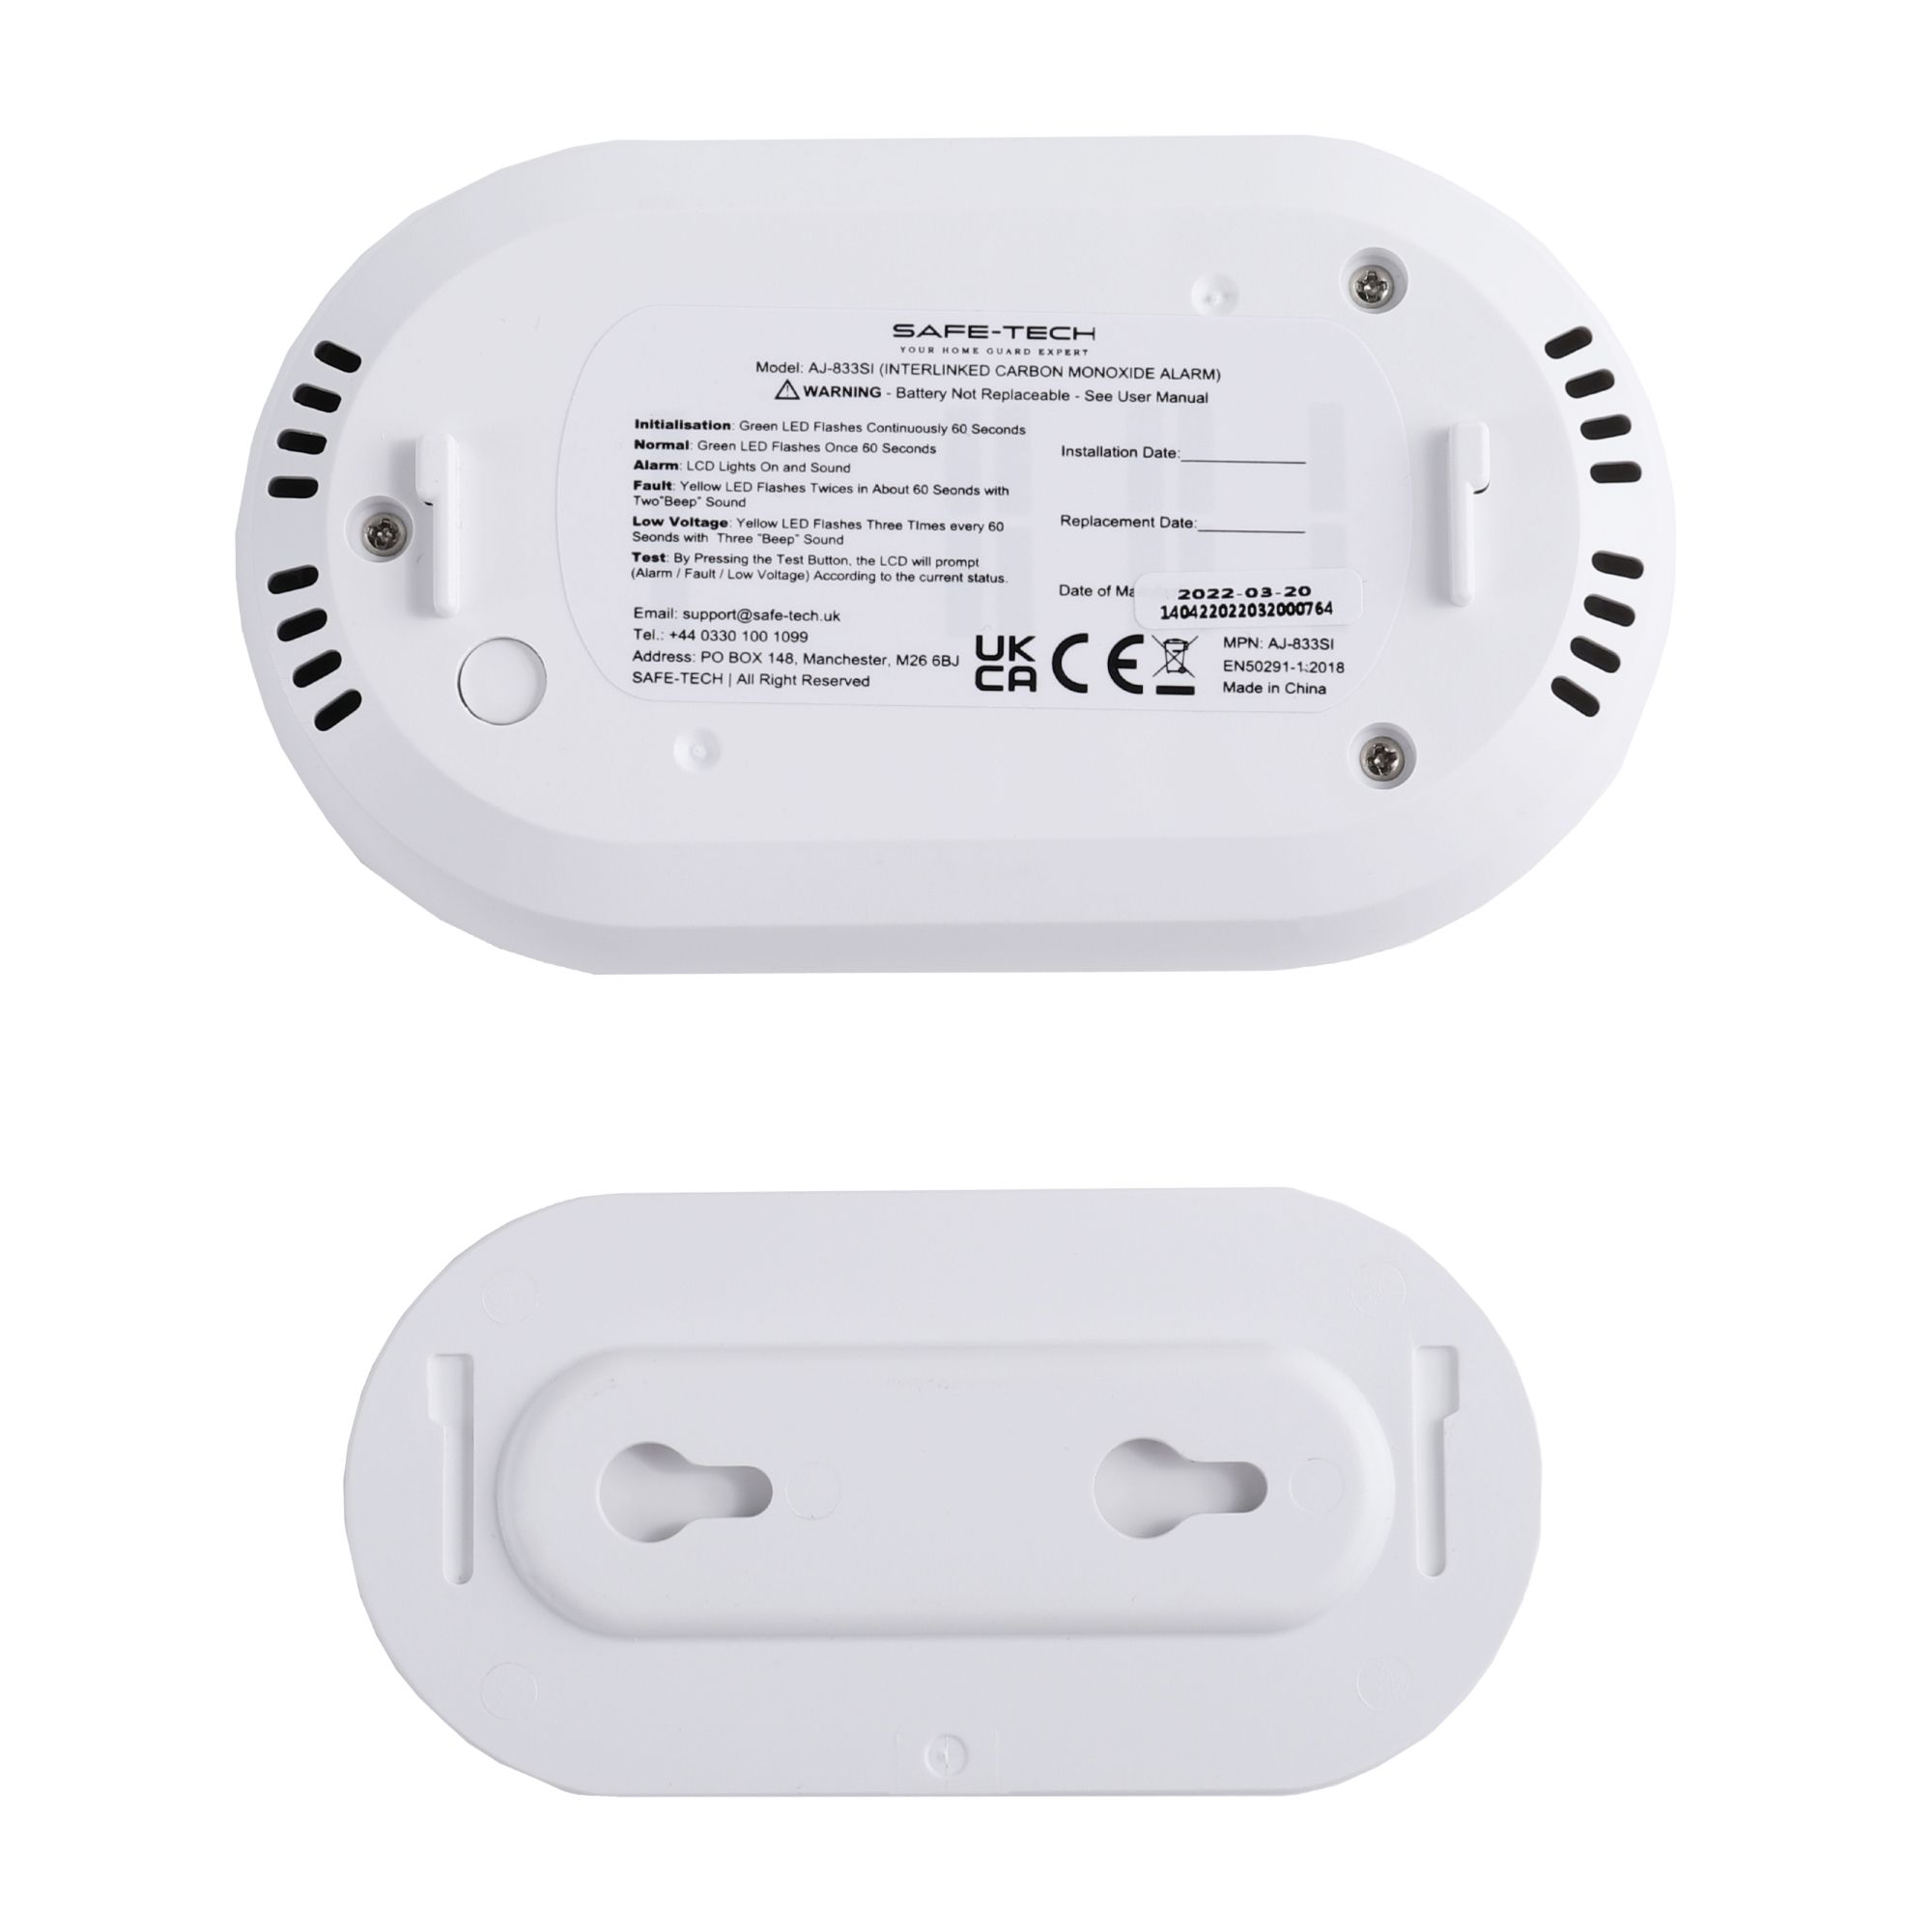 SAFE-TECH AJ-833Si Wireless Interlinked Carbon monoxide Alarm with 10-year sealed battery